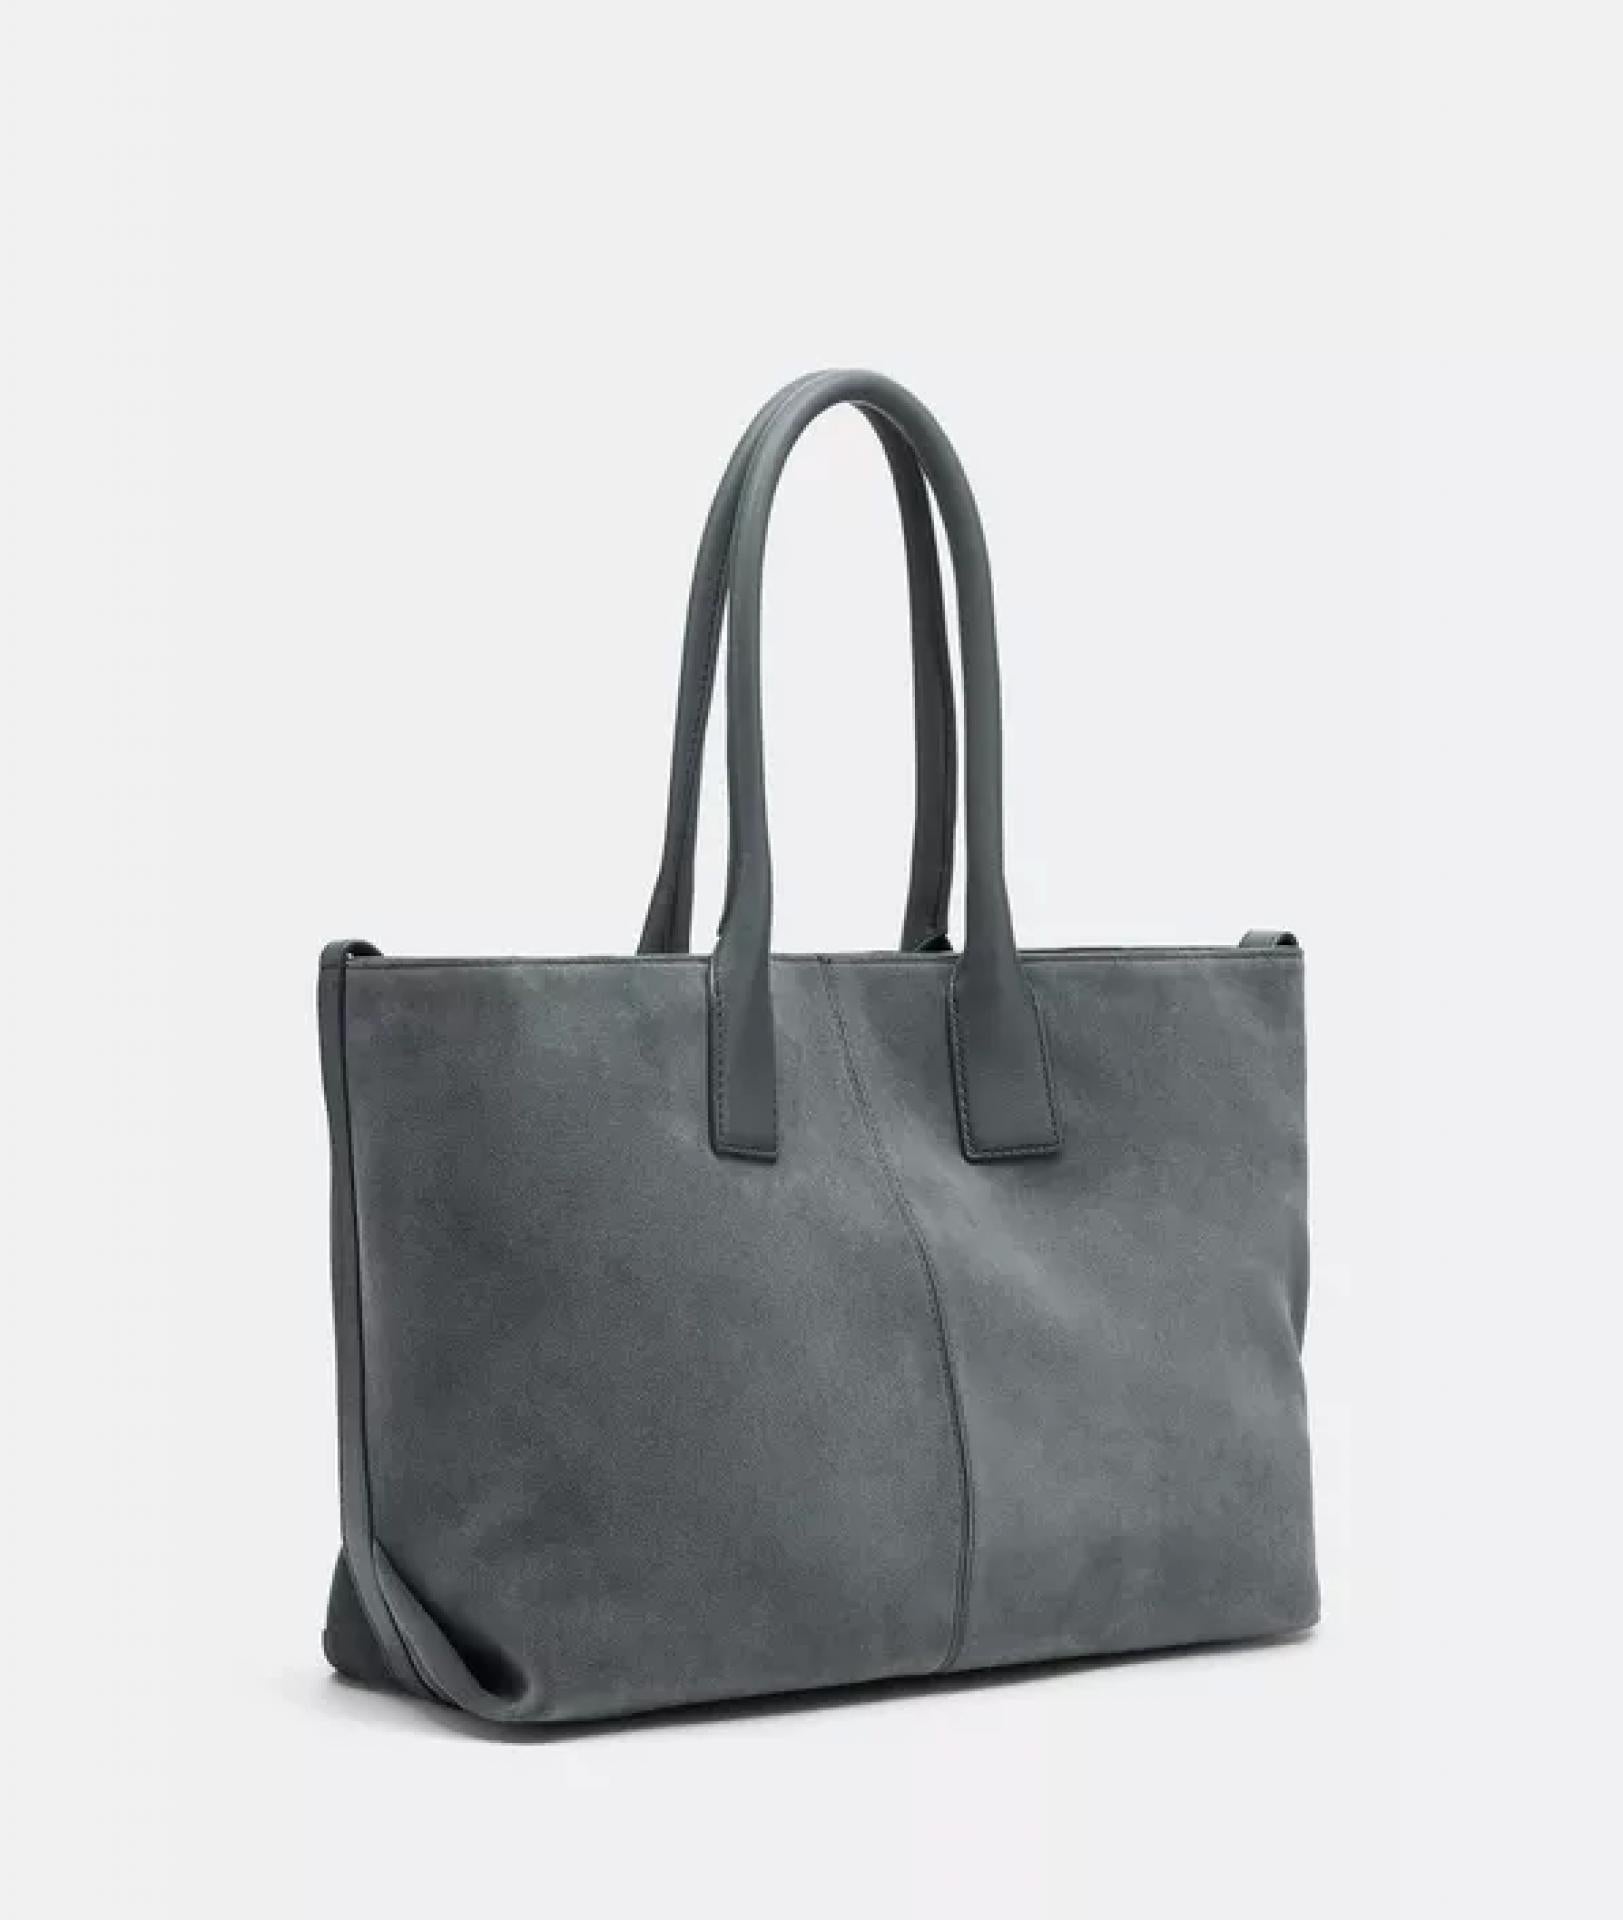 Liebeskind Shopper CHELSEA PROMO SUEDE Rooftop